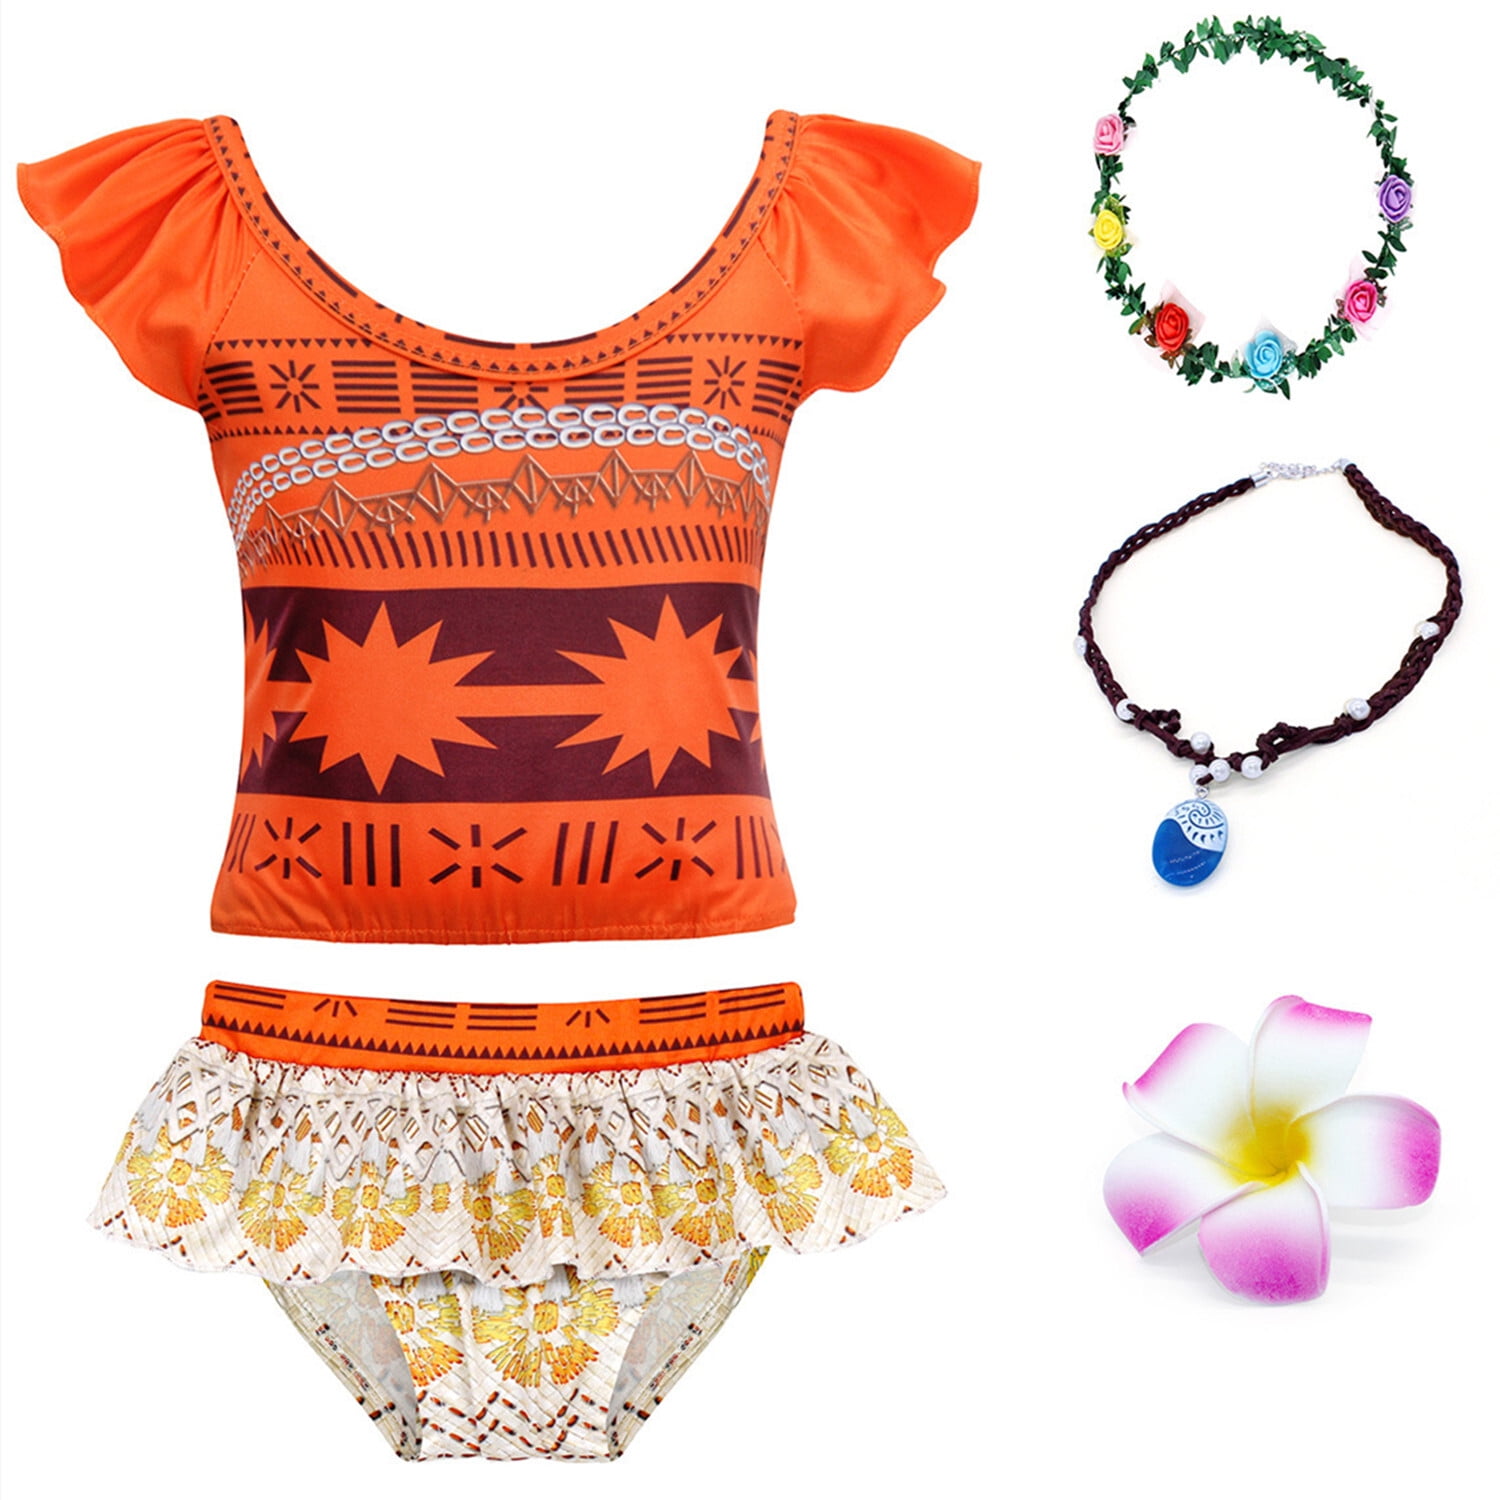 Moana Swimsuits 2 Piece for Girls Princess Bathing Suit Adventure ...